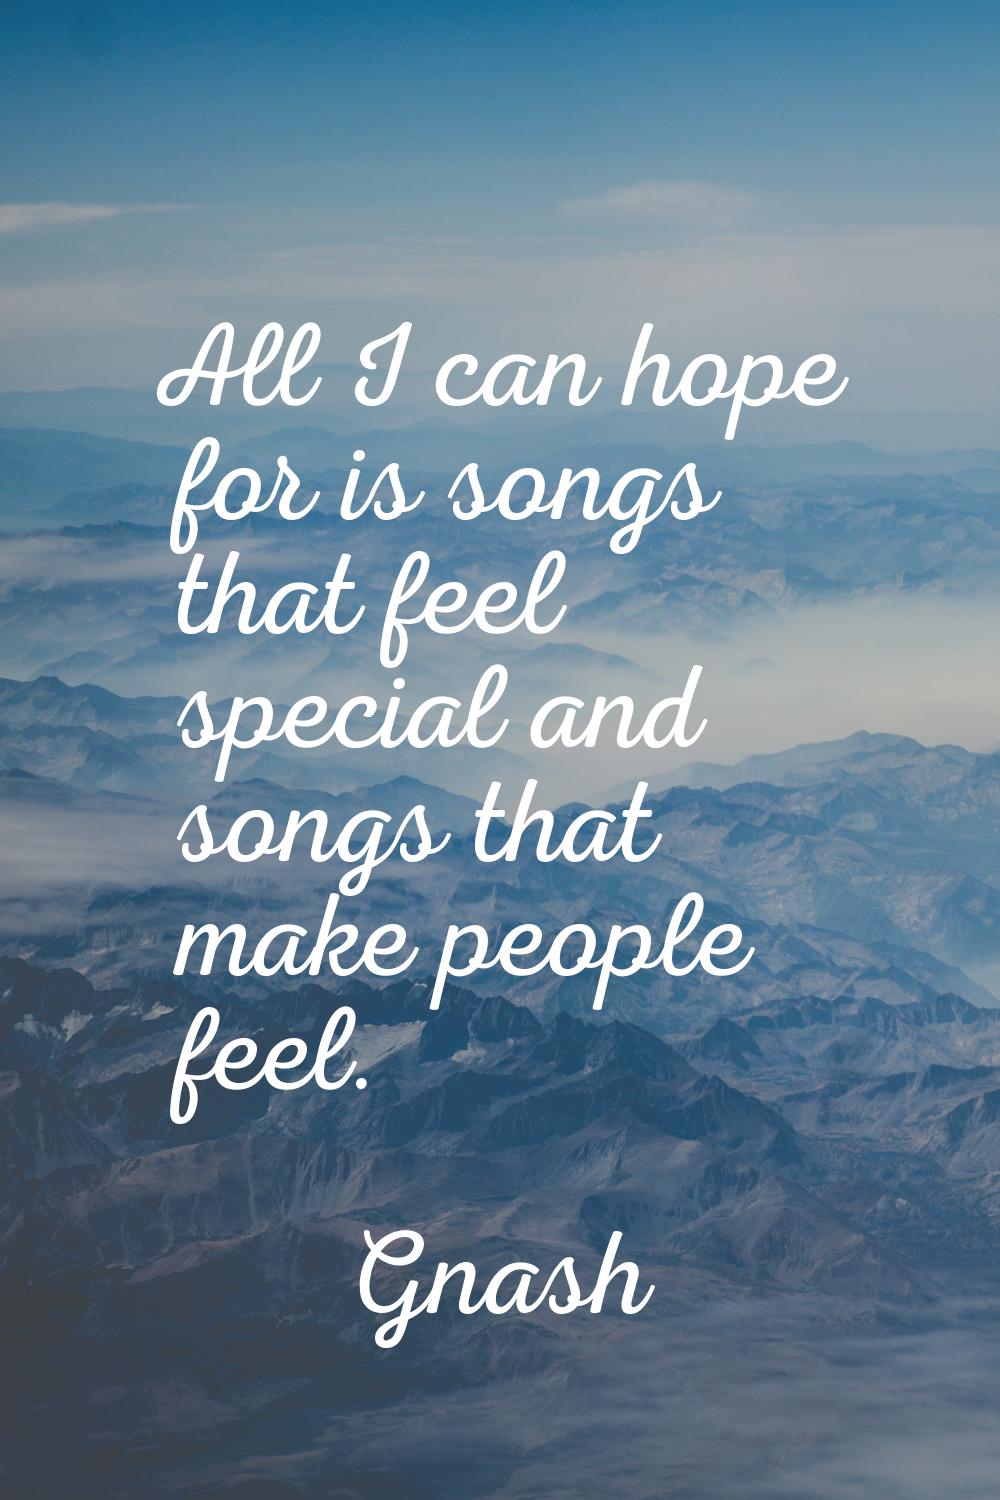 All I can hope for is songs that feel special and songs that make people feel.